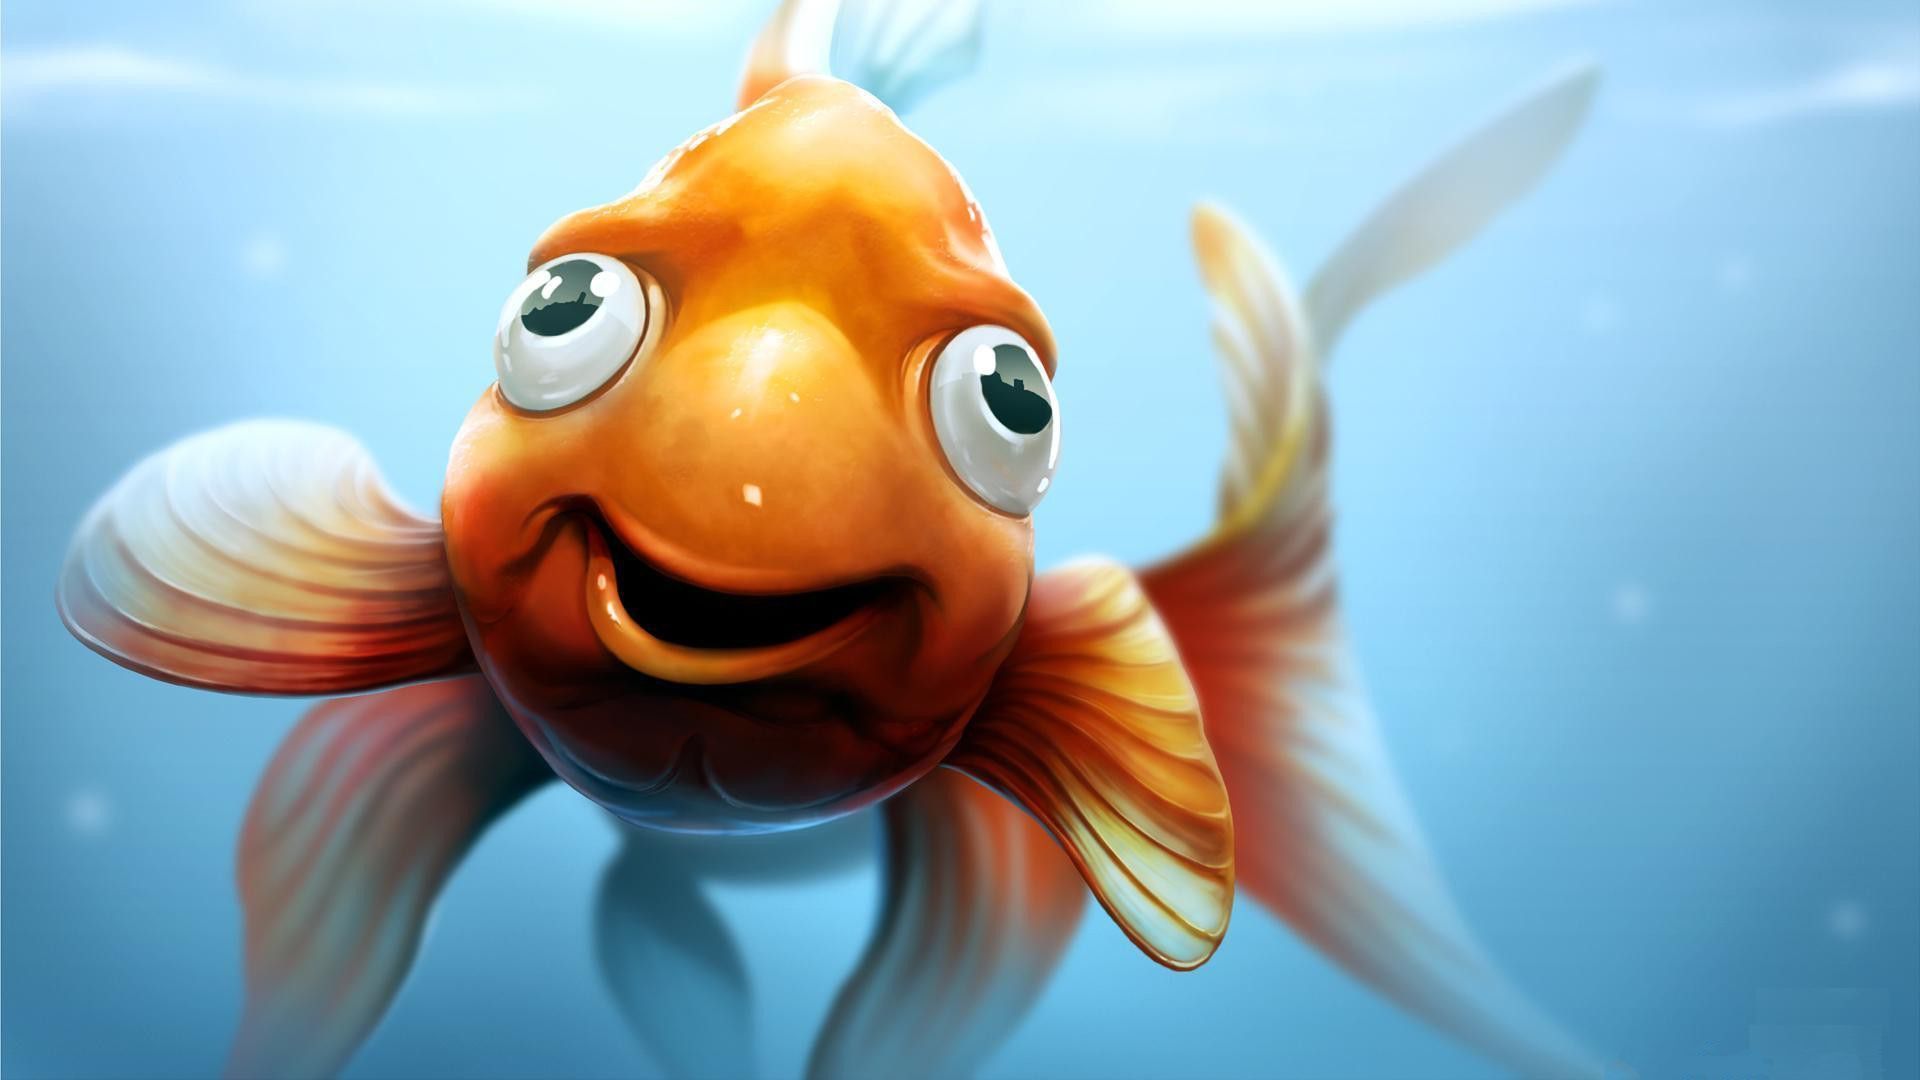 3D Goldie Fish Funny Gold Animated Wallpaper. Goldfish wallpaper, Goldfish, Cute animal illustration